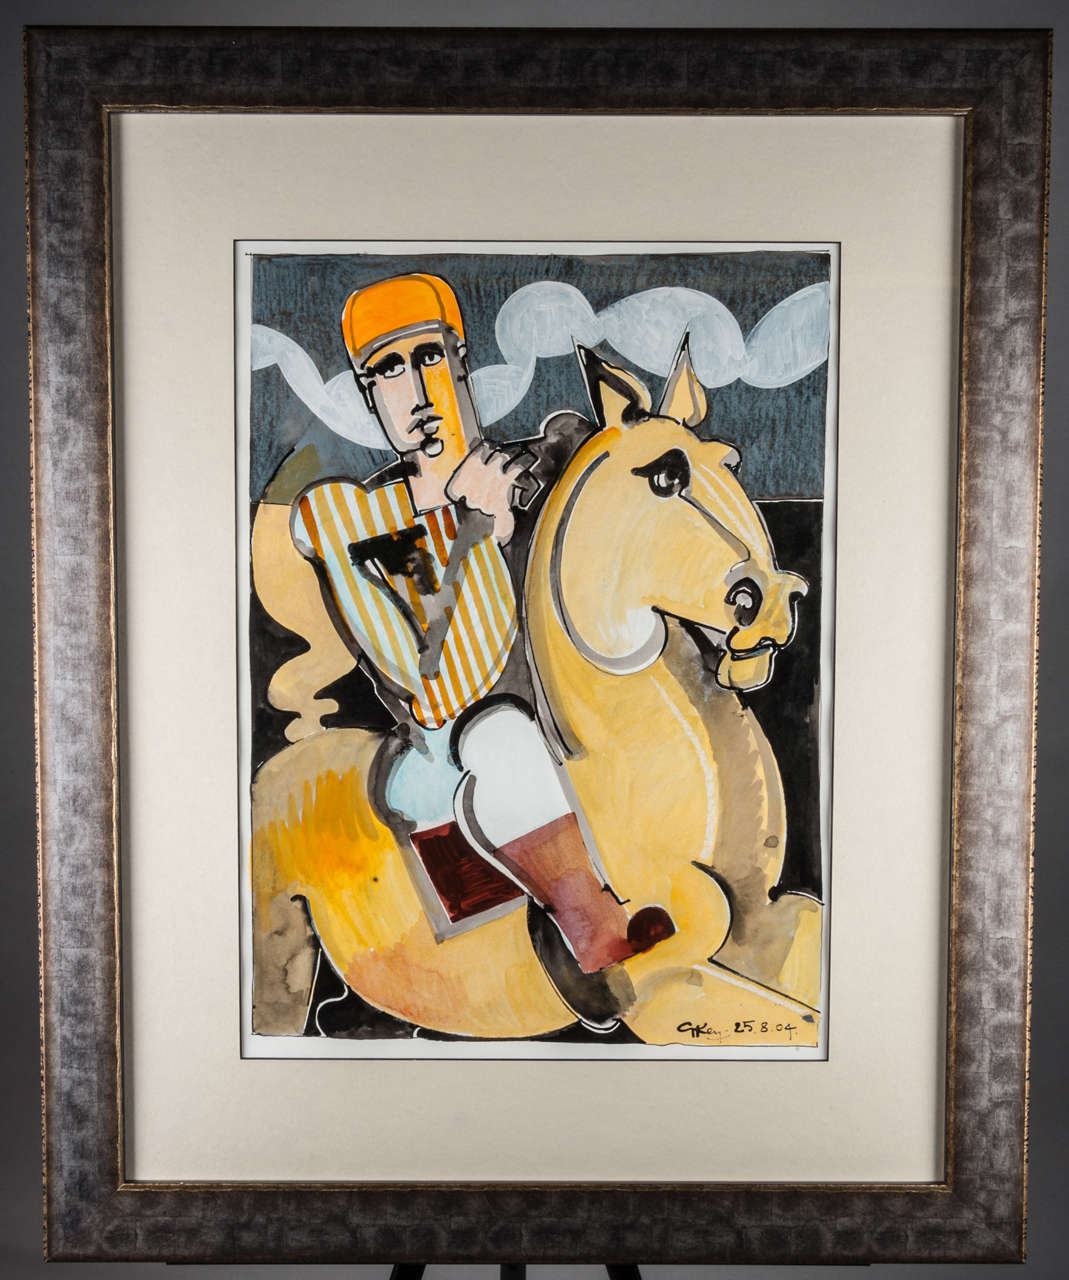 Geoffrey Key (b.1941)
Mixed media on Paper
"Rider with striped silks"
Signed and dated 25/8/04
Labelled verso with Archive Ref.1188.04
20.5" x 15" (52cms x 38cms)
Geoffrey Key was born in Manchester in 1941. In 1958 he